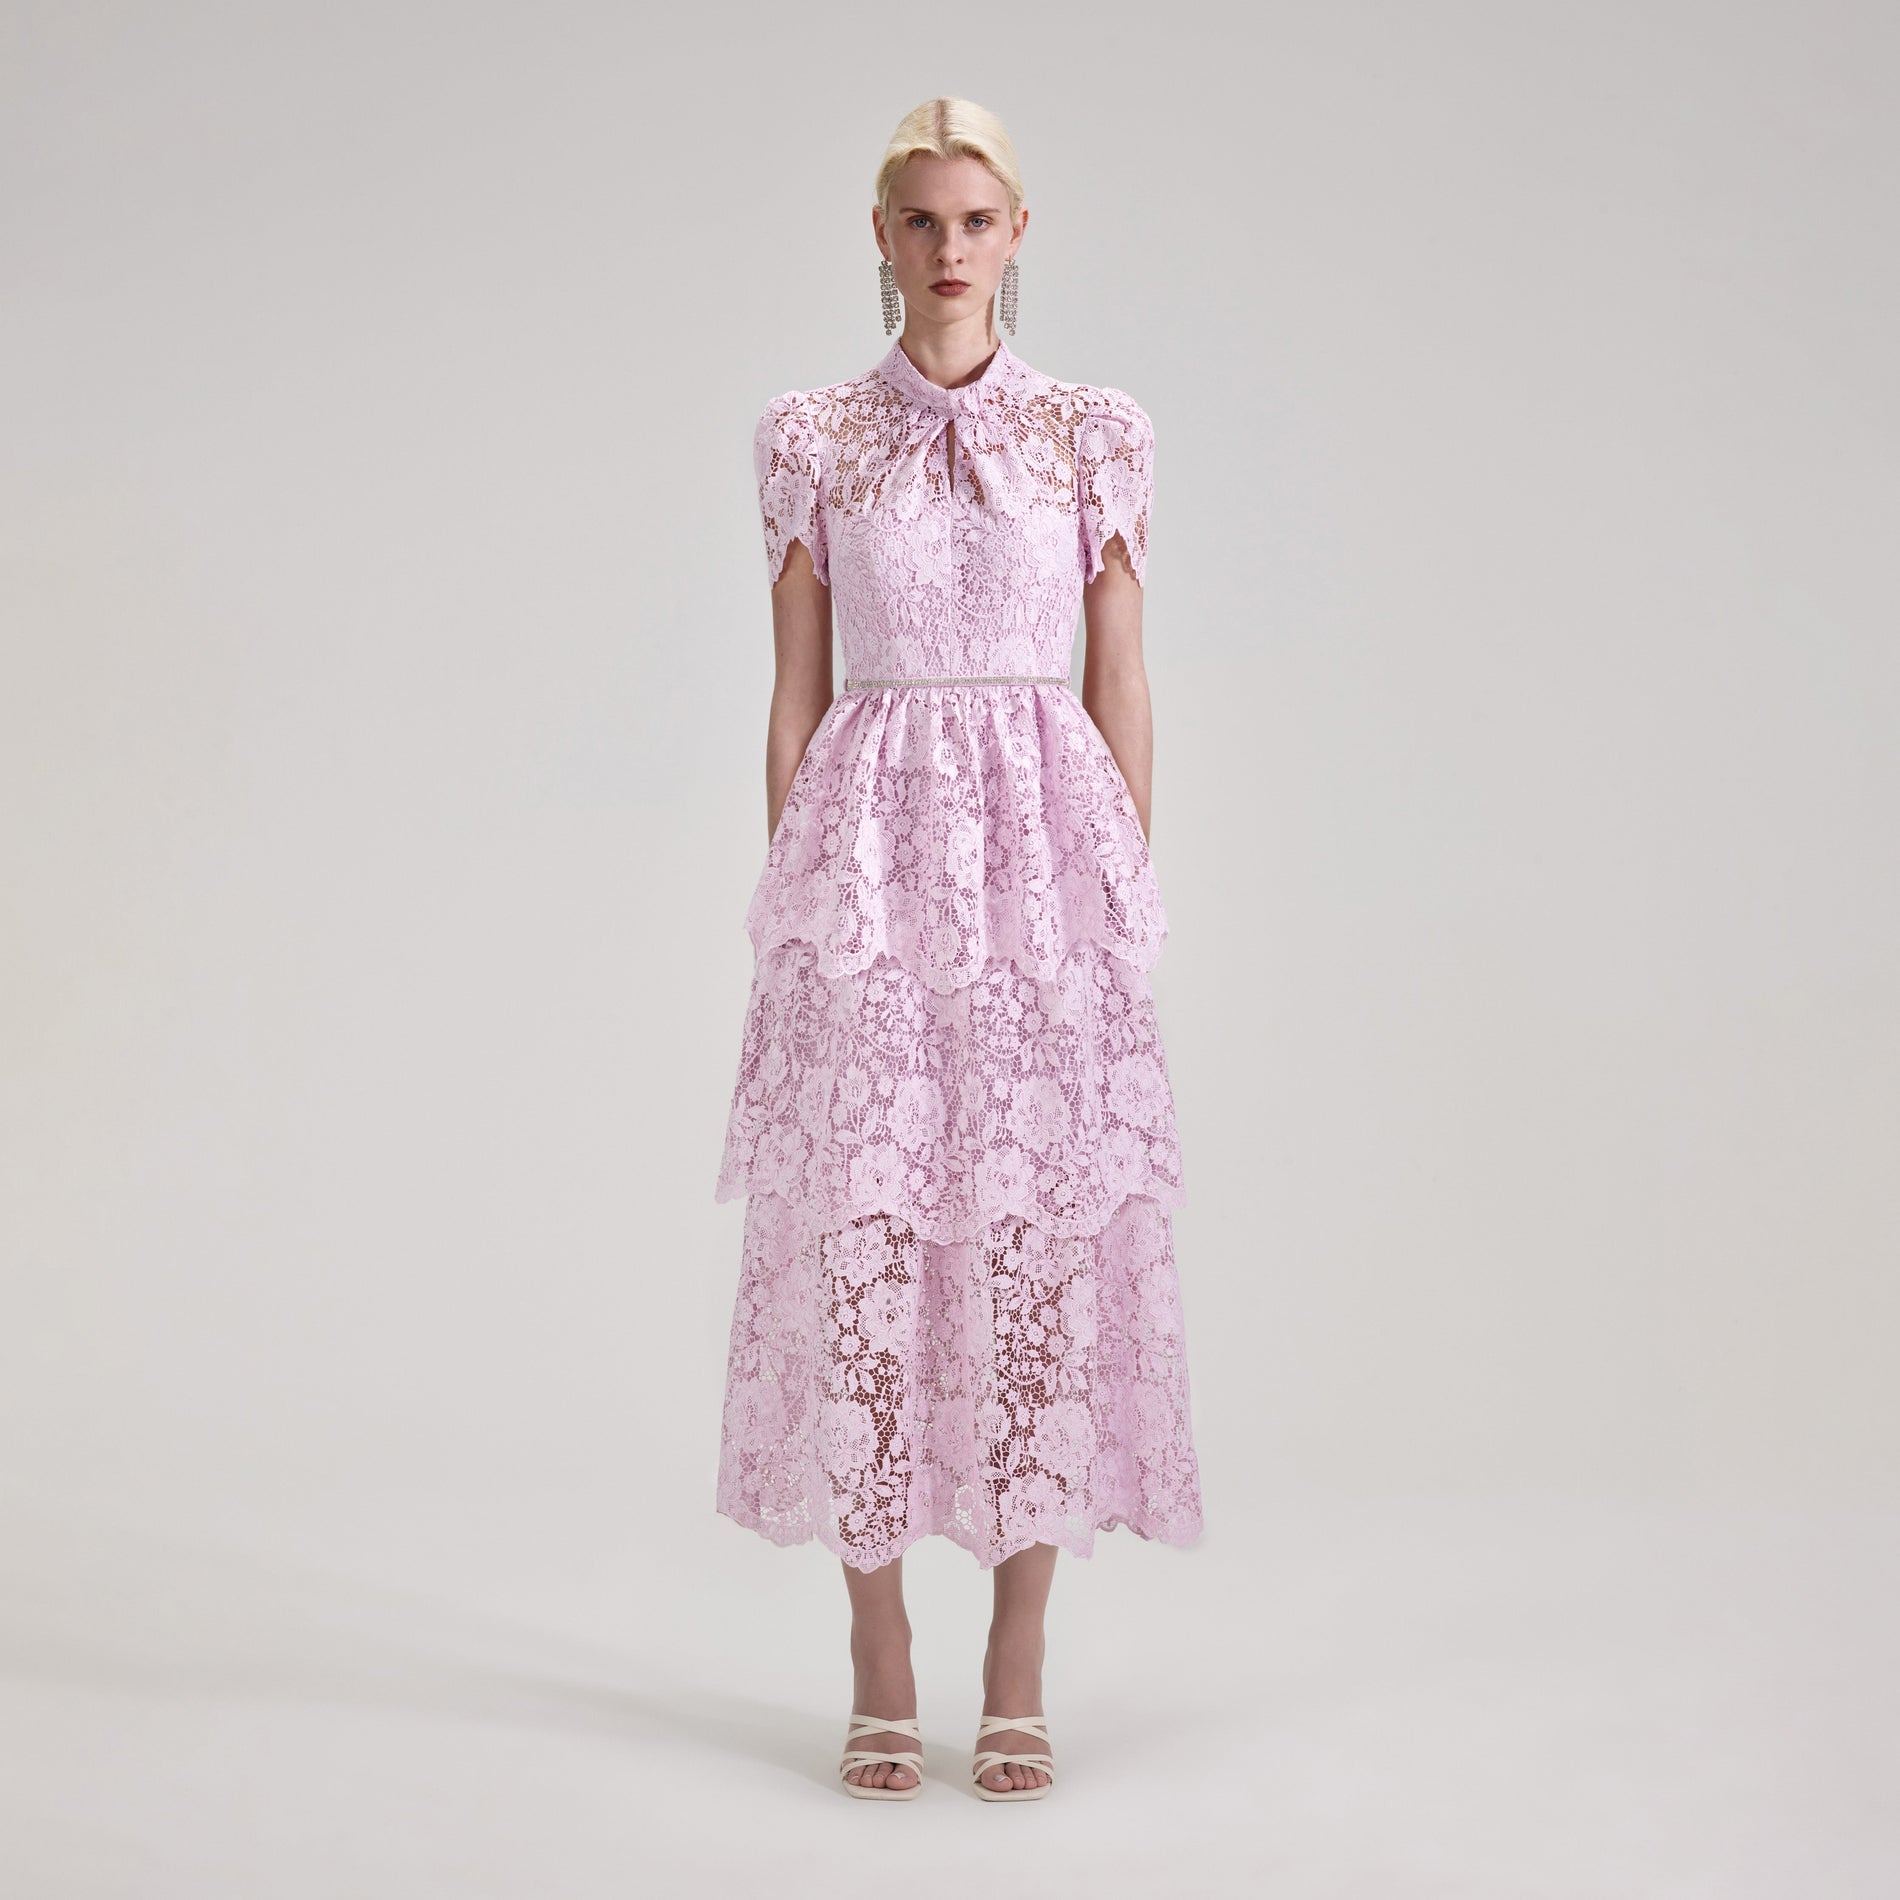 A woman wearing the Pink Cord Lace Tiered Midi Dress